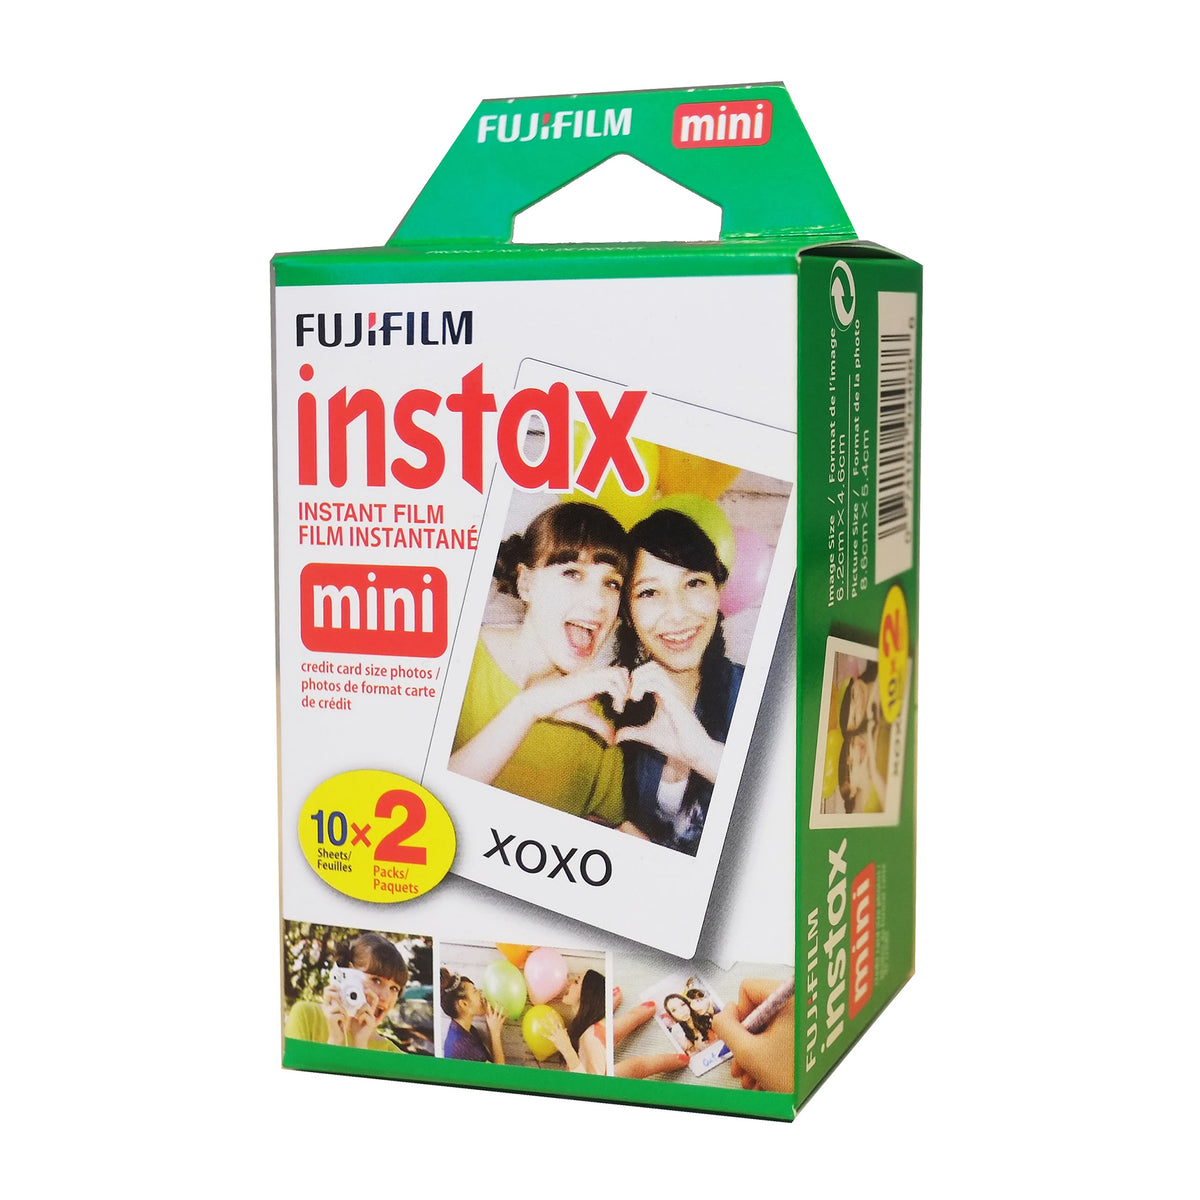 Instax Mini Film Packs- 2 pack, 20 sheets | Getty Store